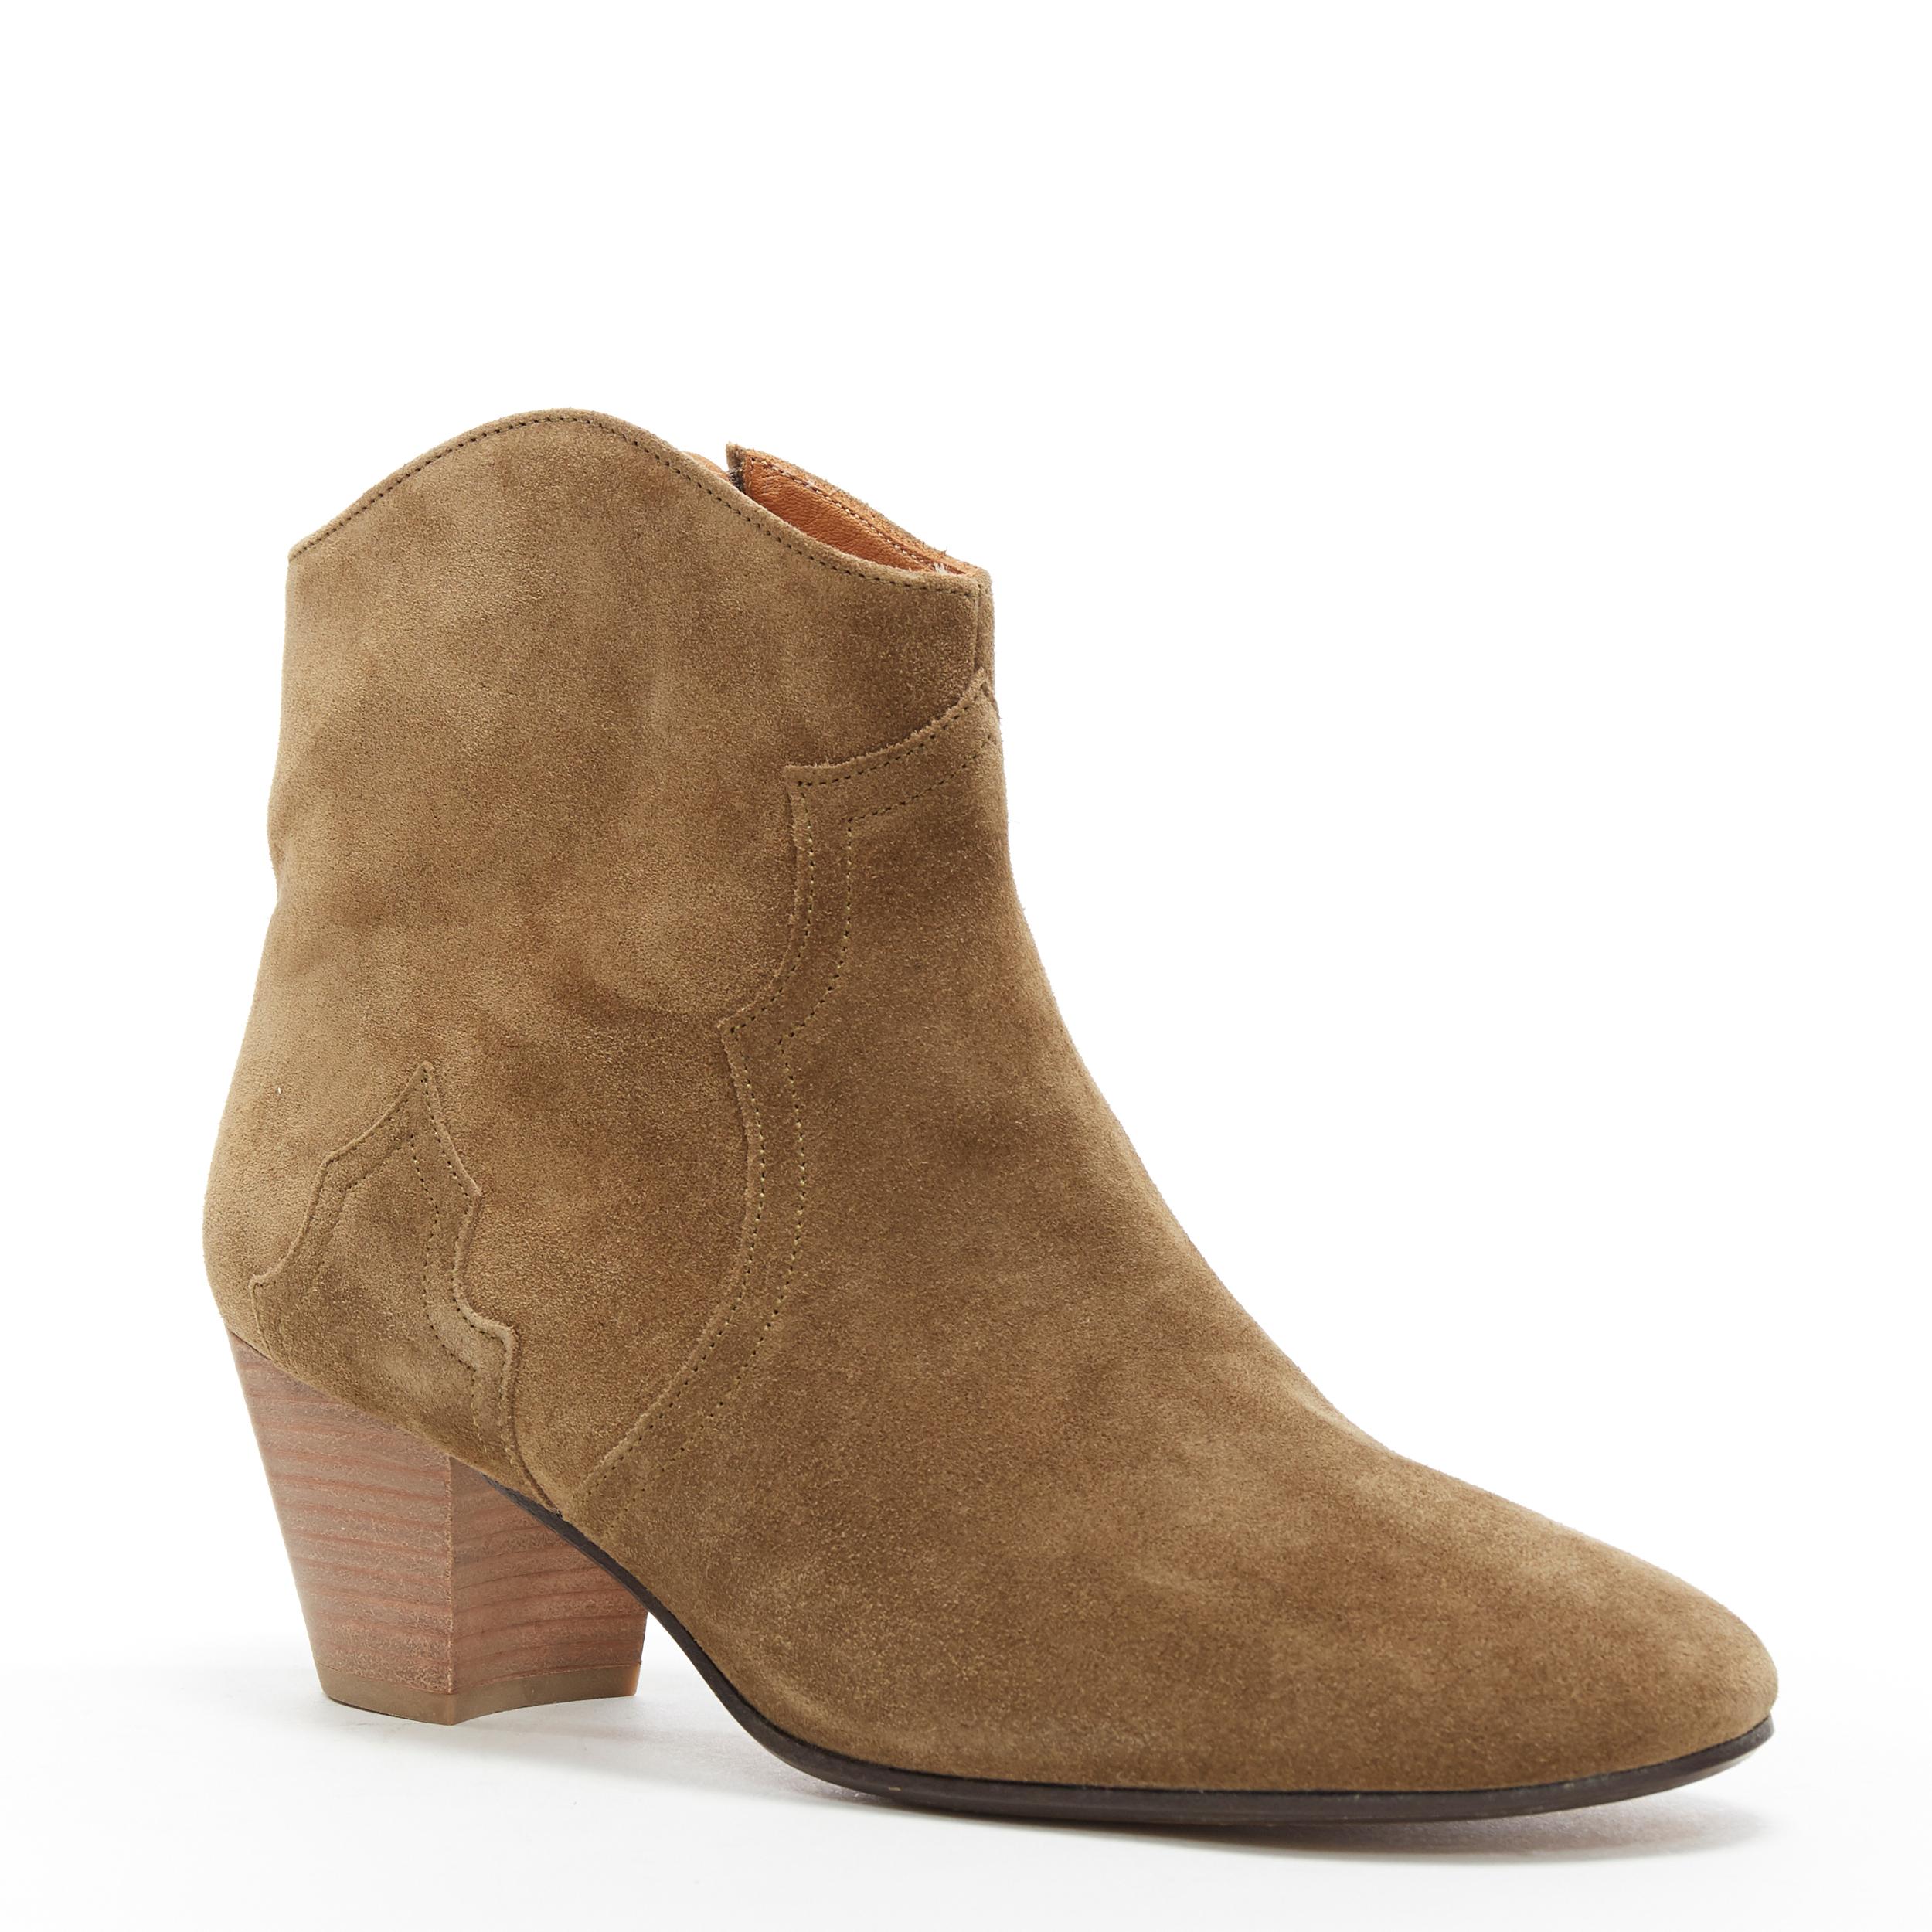 new ISABEL MARANT ETOILE Dicker taupe calf velvet suede pull on ankle boot EU40
Brand: Isabel Marant
Designer: Isabel Marant
Model Name / Style: Dicker boot
Material: Suede
Color: Brown; taupe grey
Pattern: Solid
Closure: Zipper
Lining material: